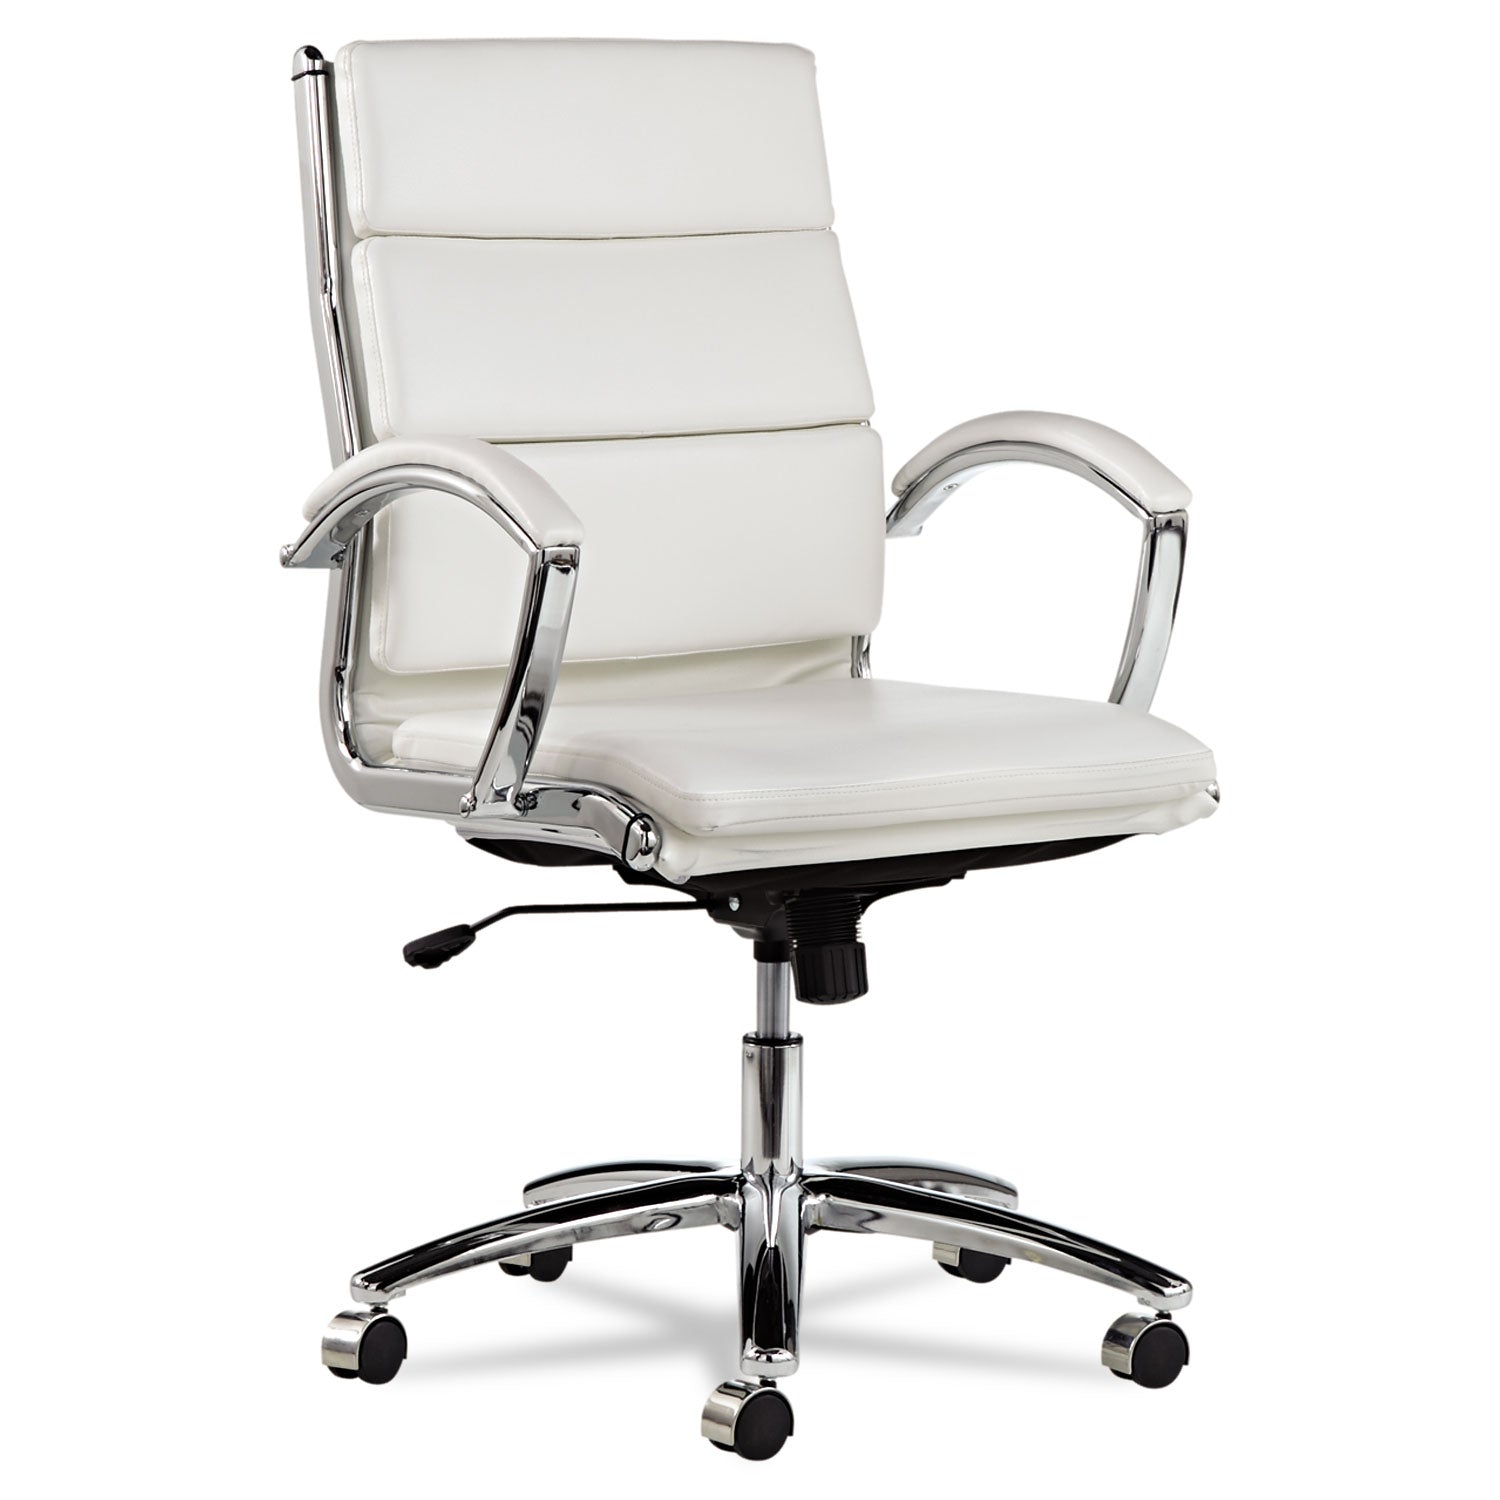 Alera Neratoli Mid-Back Slim Profile Chair, Faux Leather, Up to 275 lb, 18.3" to 21.85" Seat Height, White Seat/Back, Chrome - 